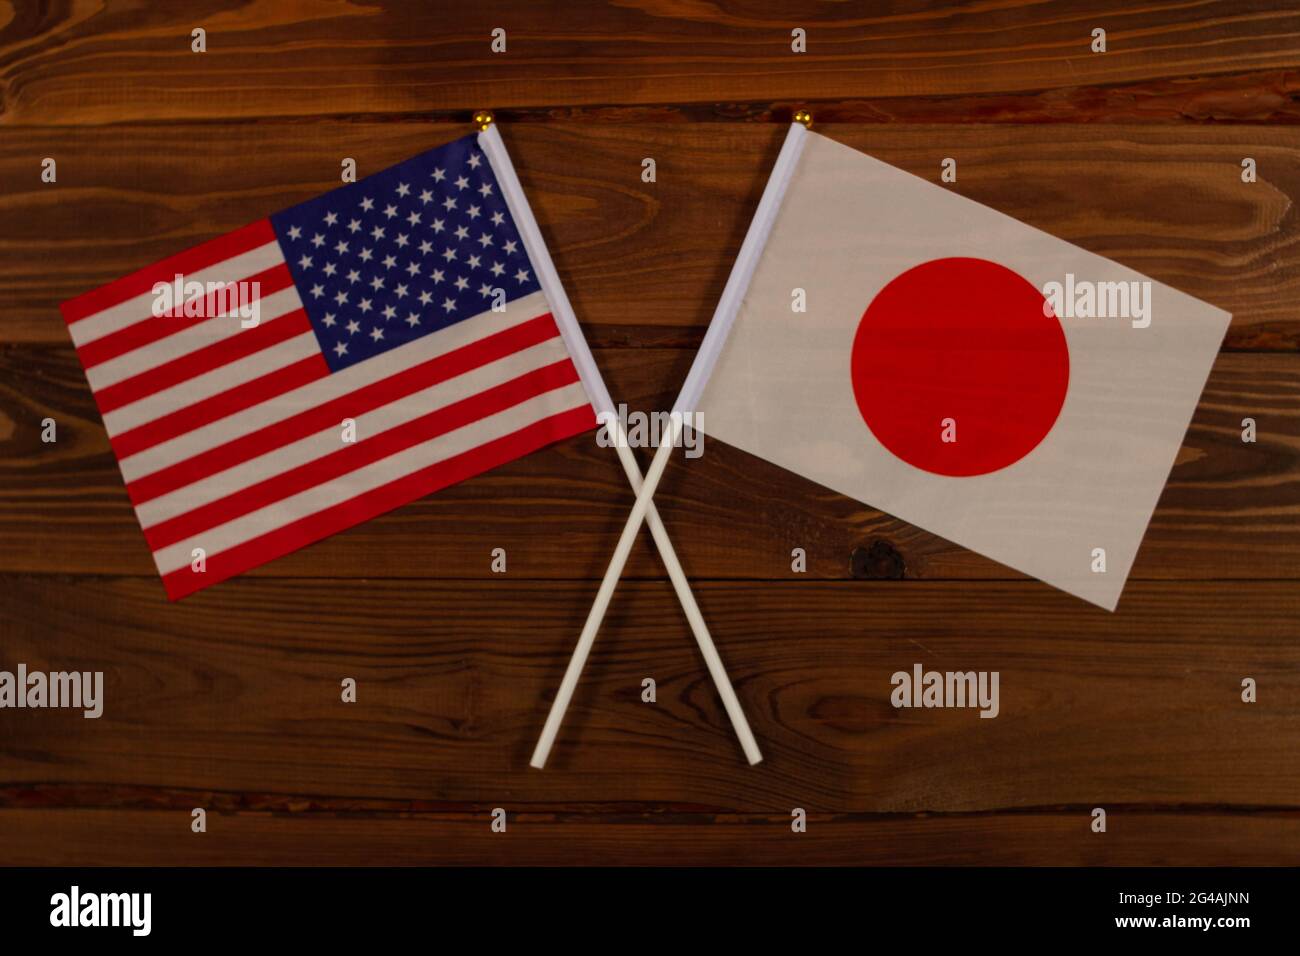 Flag of USA and flag of Japan crossed with each other. USA vs Japan. The image illustrates the relationship between countries. Photography for video n Stock Photo